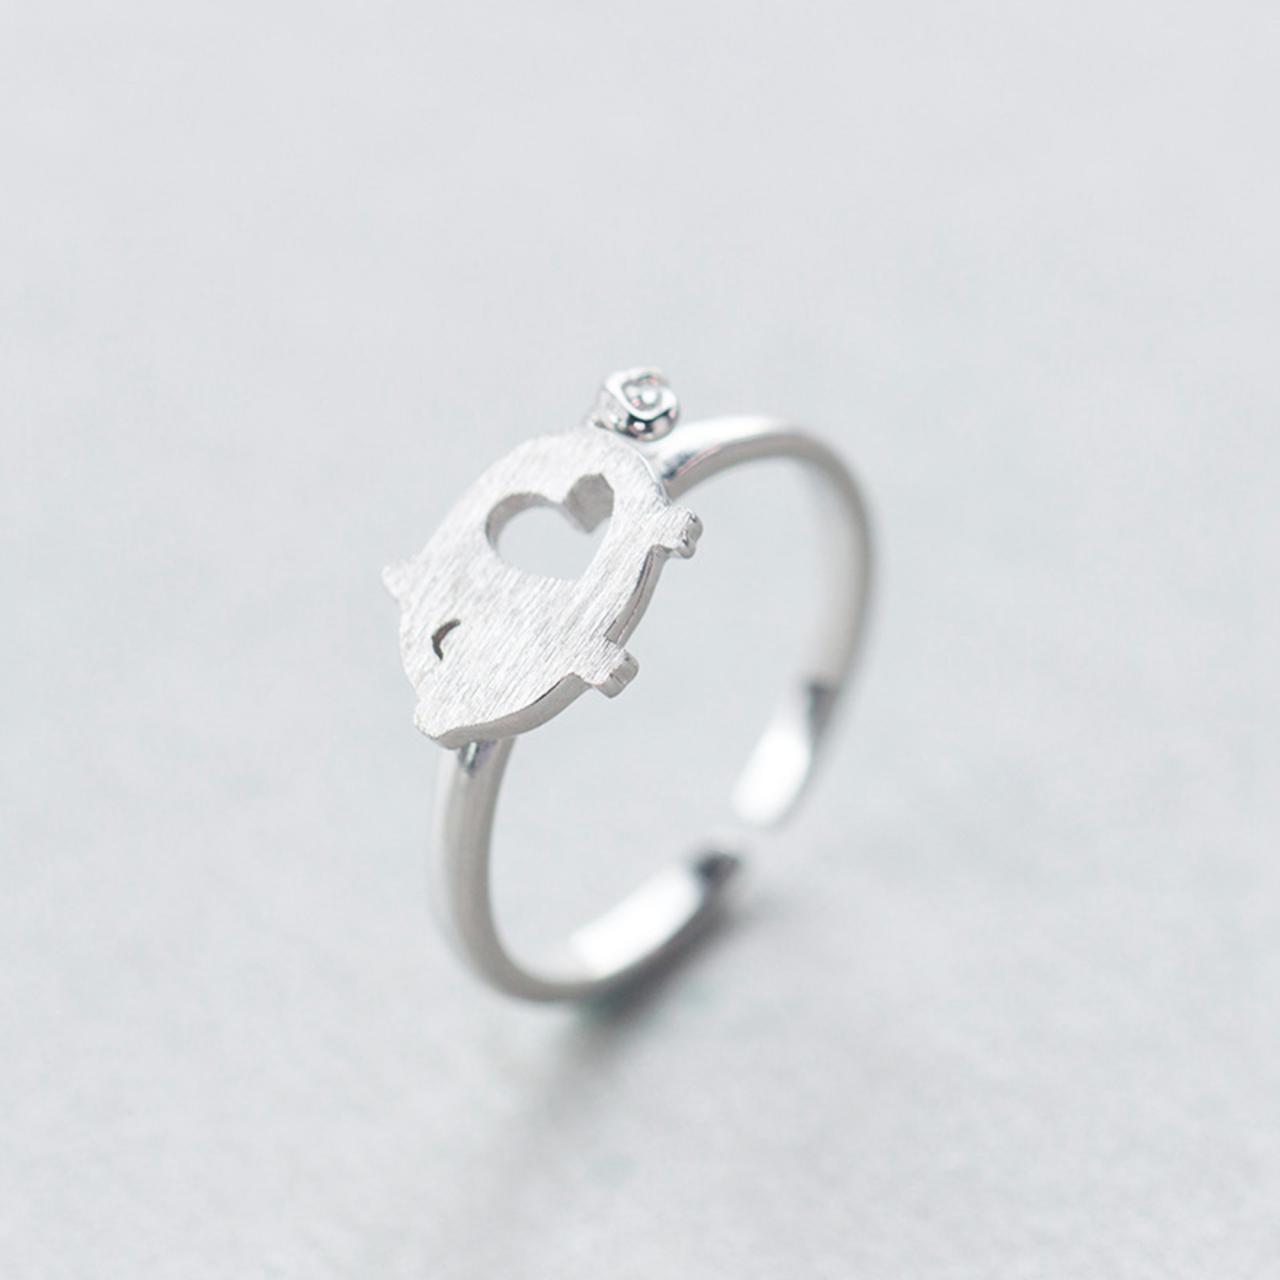 Filigree Pig Ring, Sterling Silver Adjustable Pig Ring, Minimalist Rings, Dainty Ring, Women Ring, Everyday Jewelry, Japanese Pig Ring